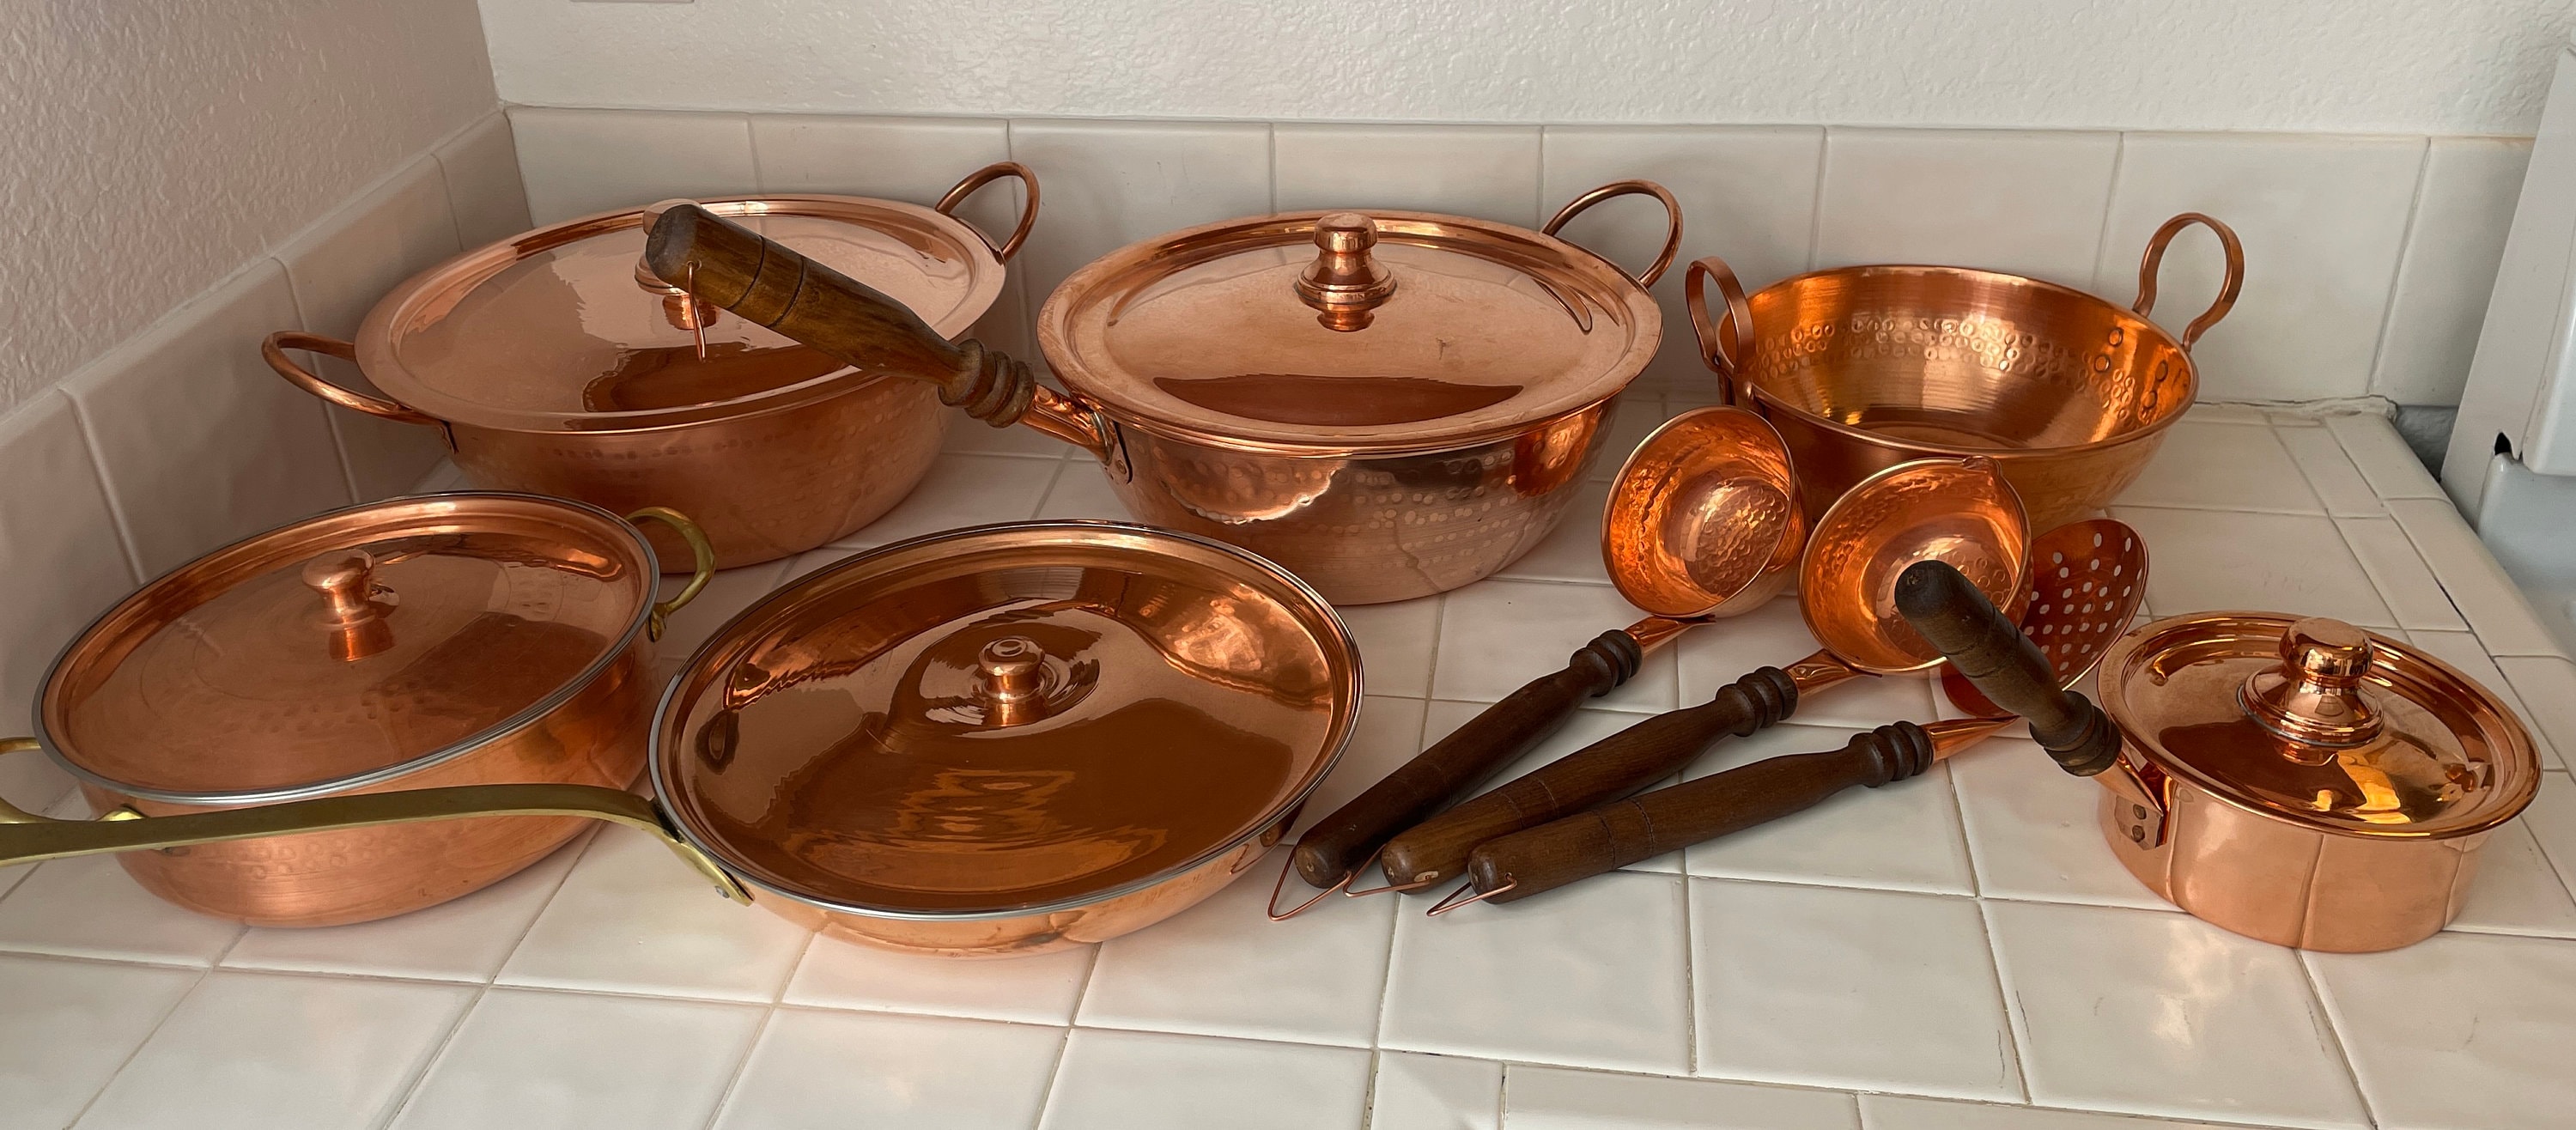 VINTAGE COBRE COPPER 12 INCH FRYING PAN WITH LID MADE IN CHILE